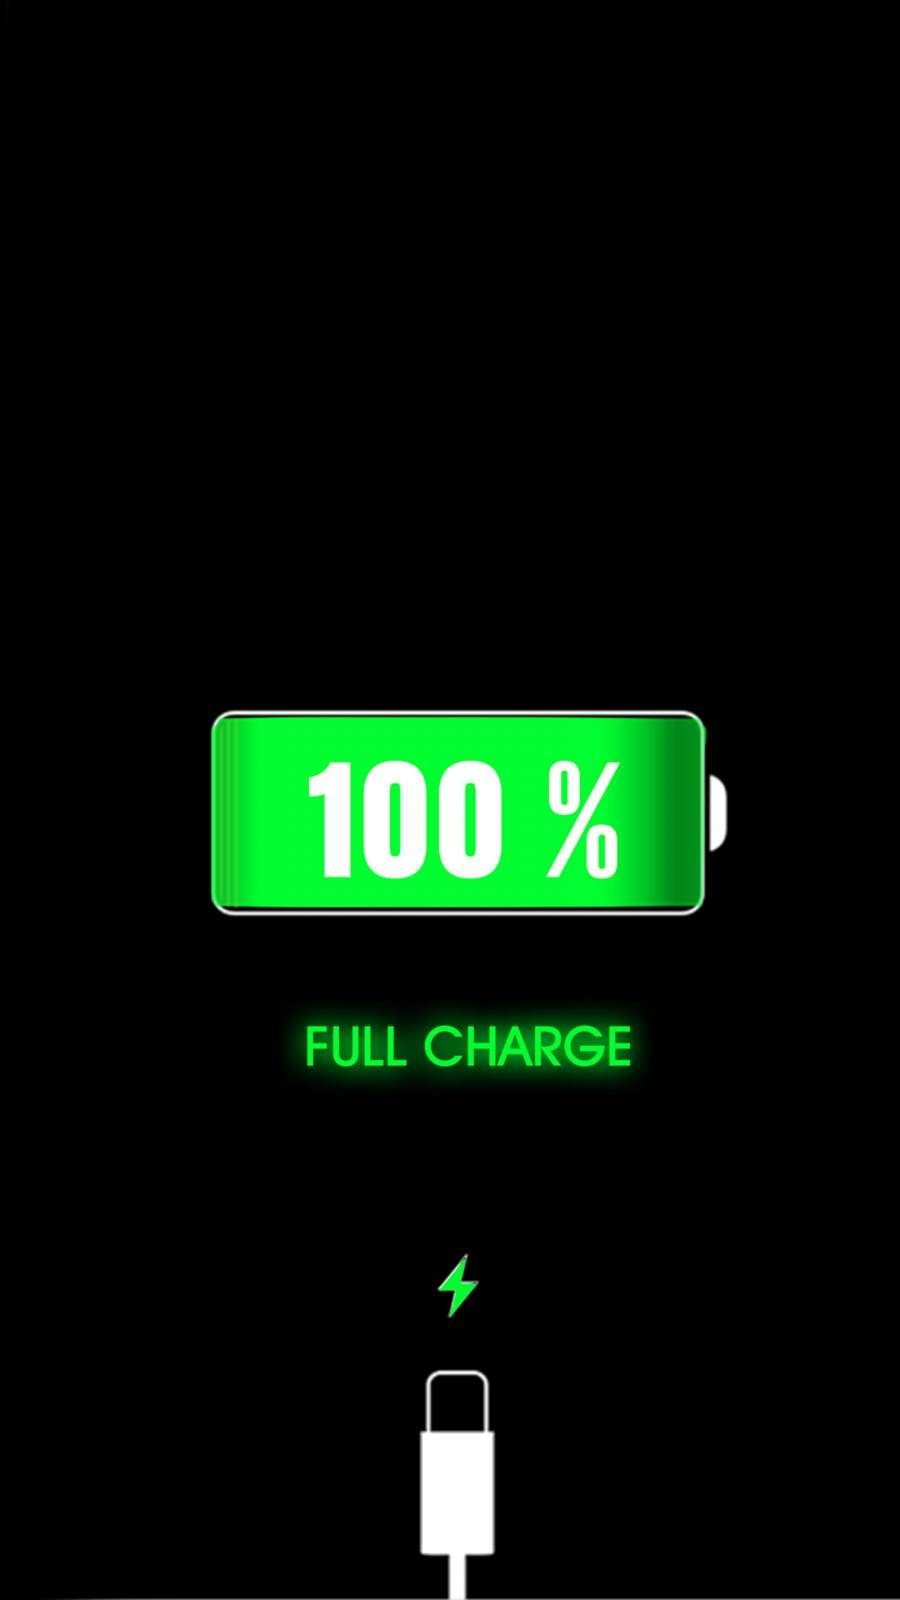 Full Charge iPhone Wallpaper. iPhone wallpaper, iPhone wallpaper image, Wallpaper iphone cute